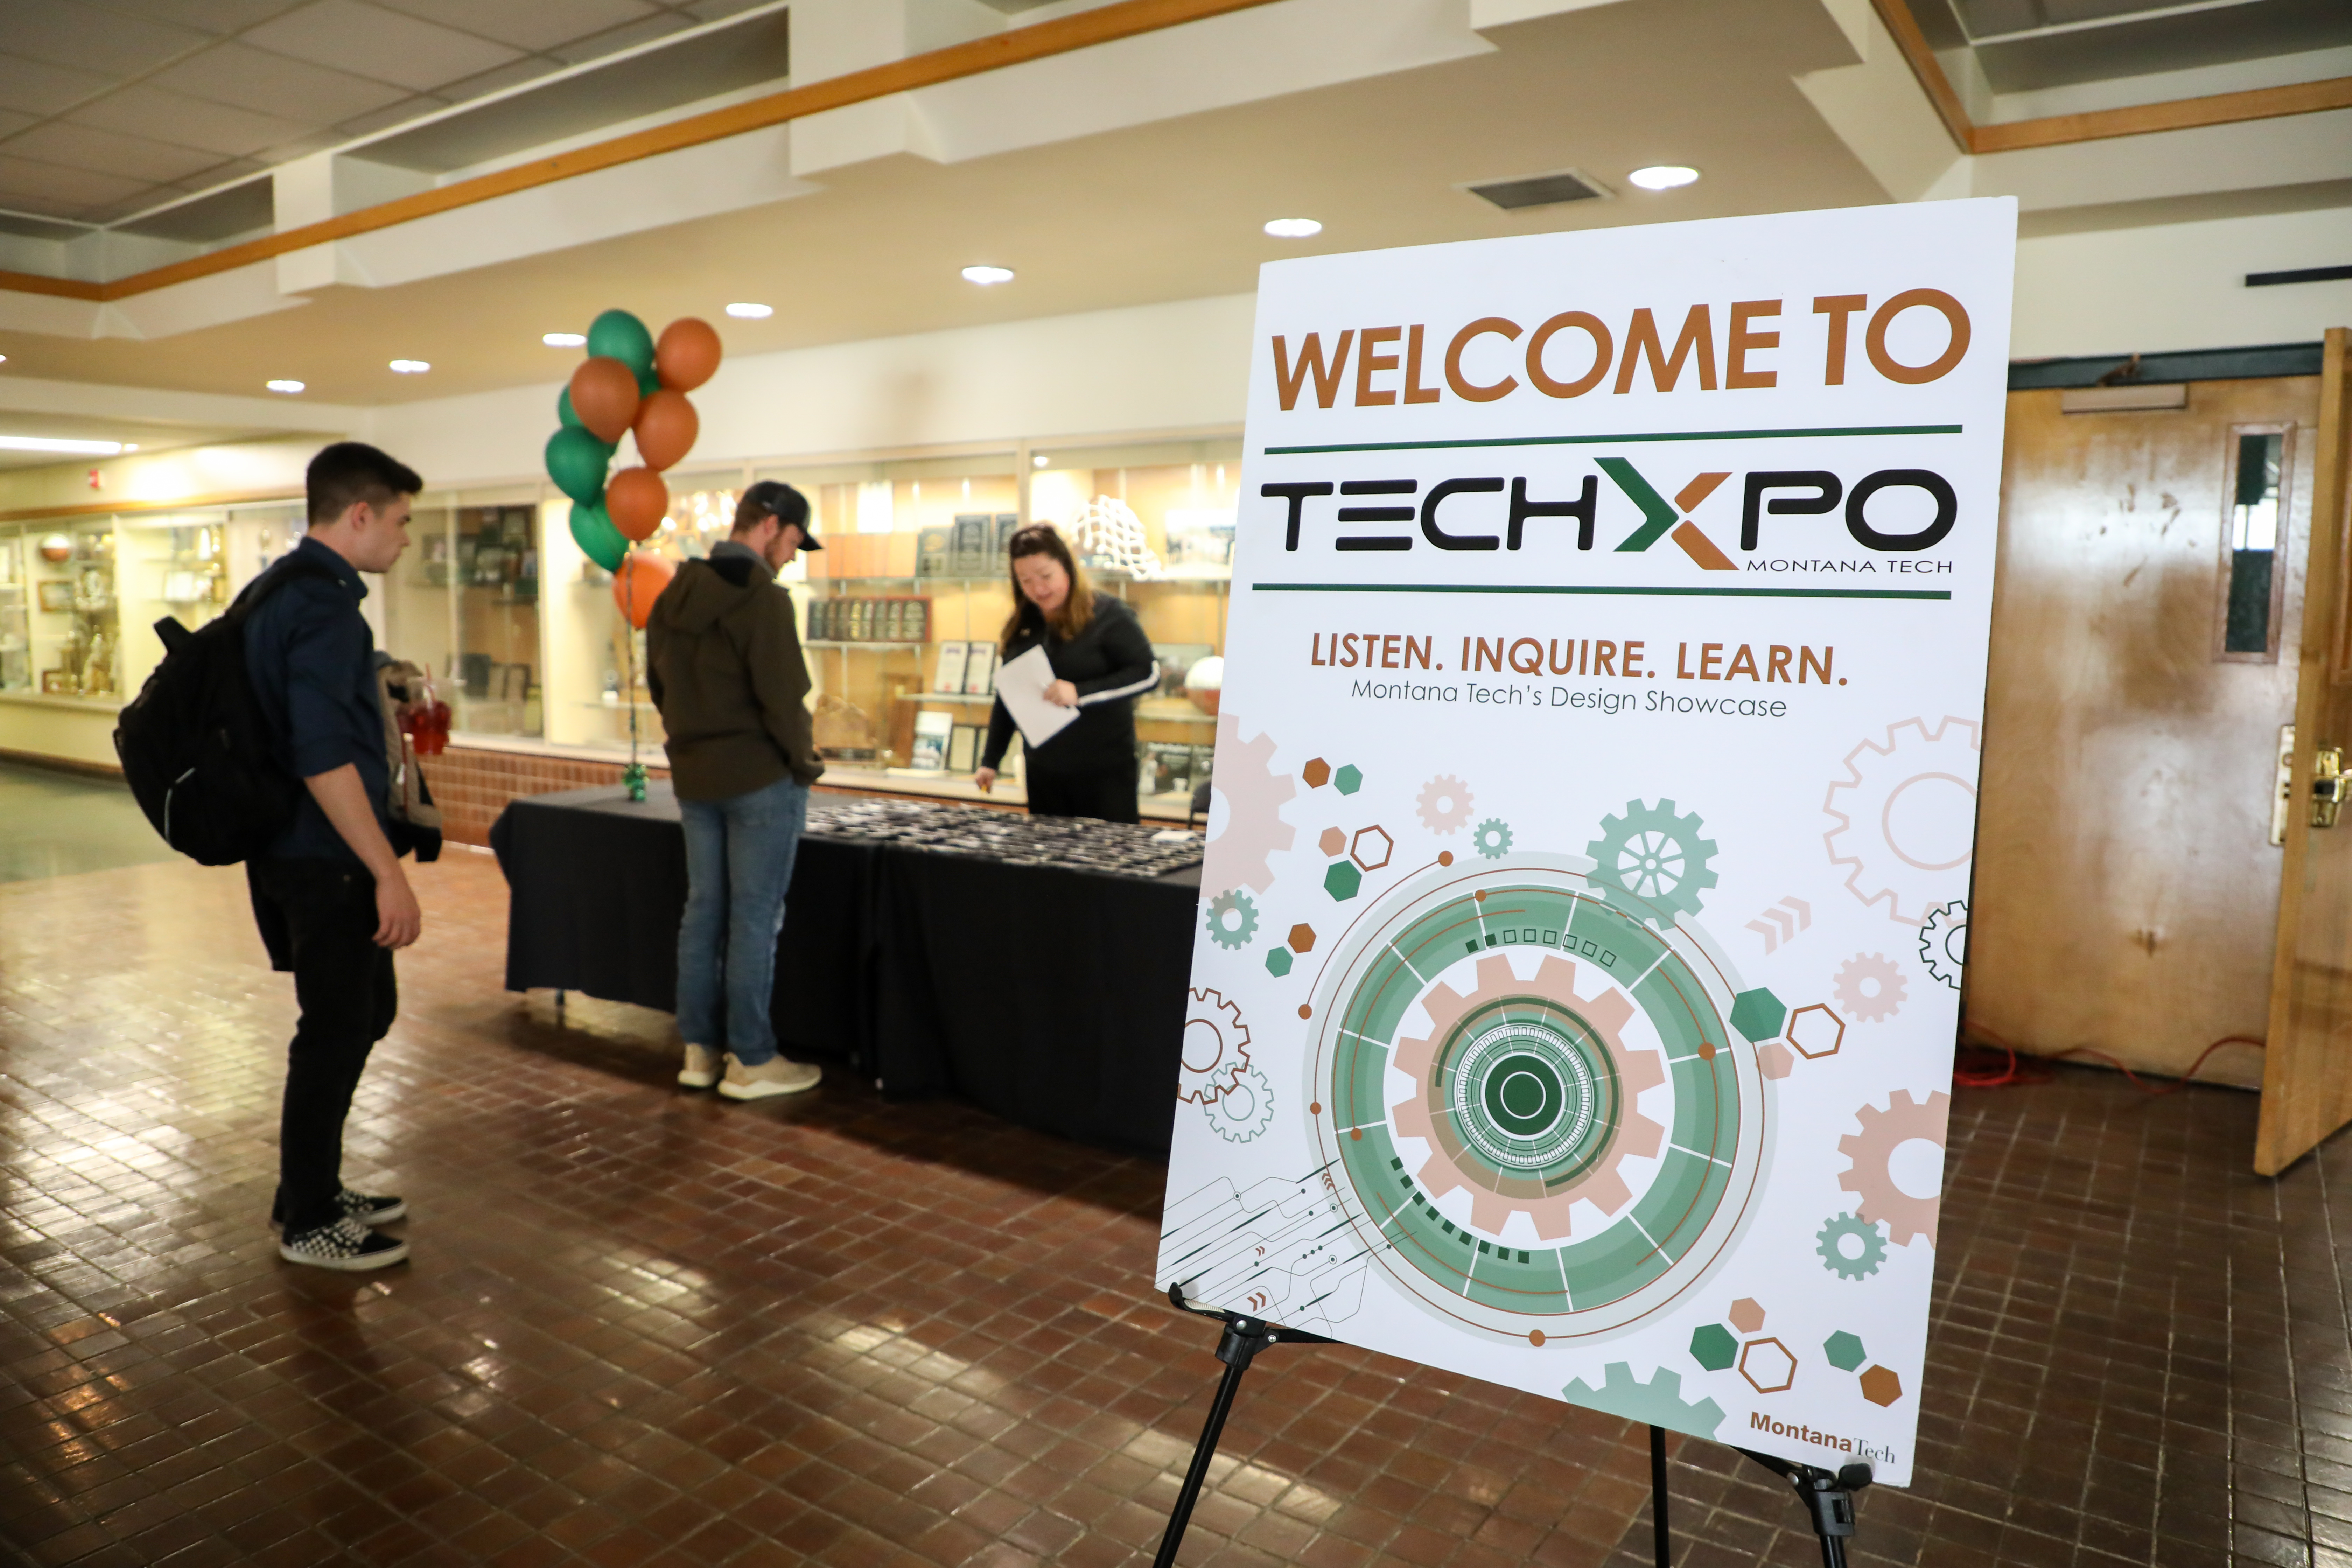 Sign welcoming people to Techxpo